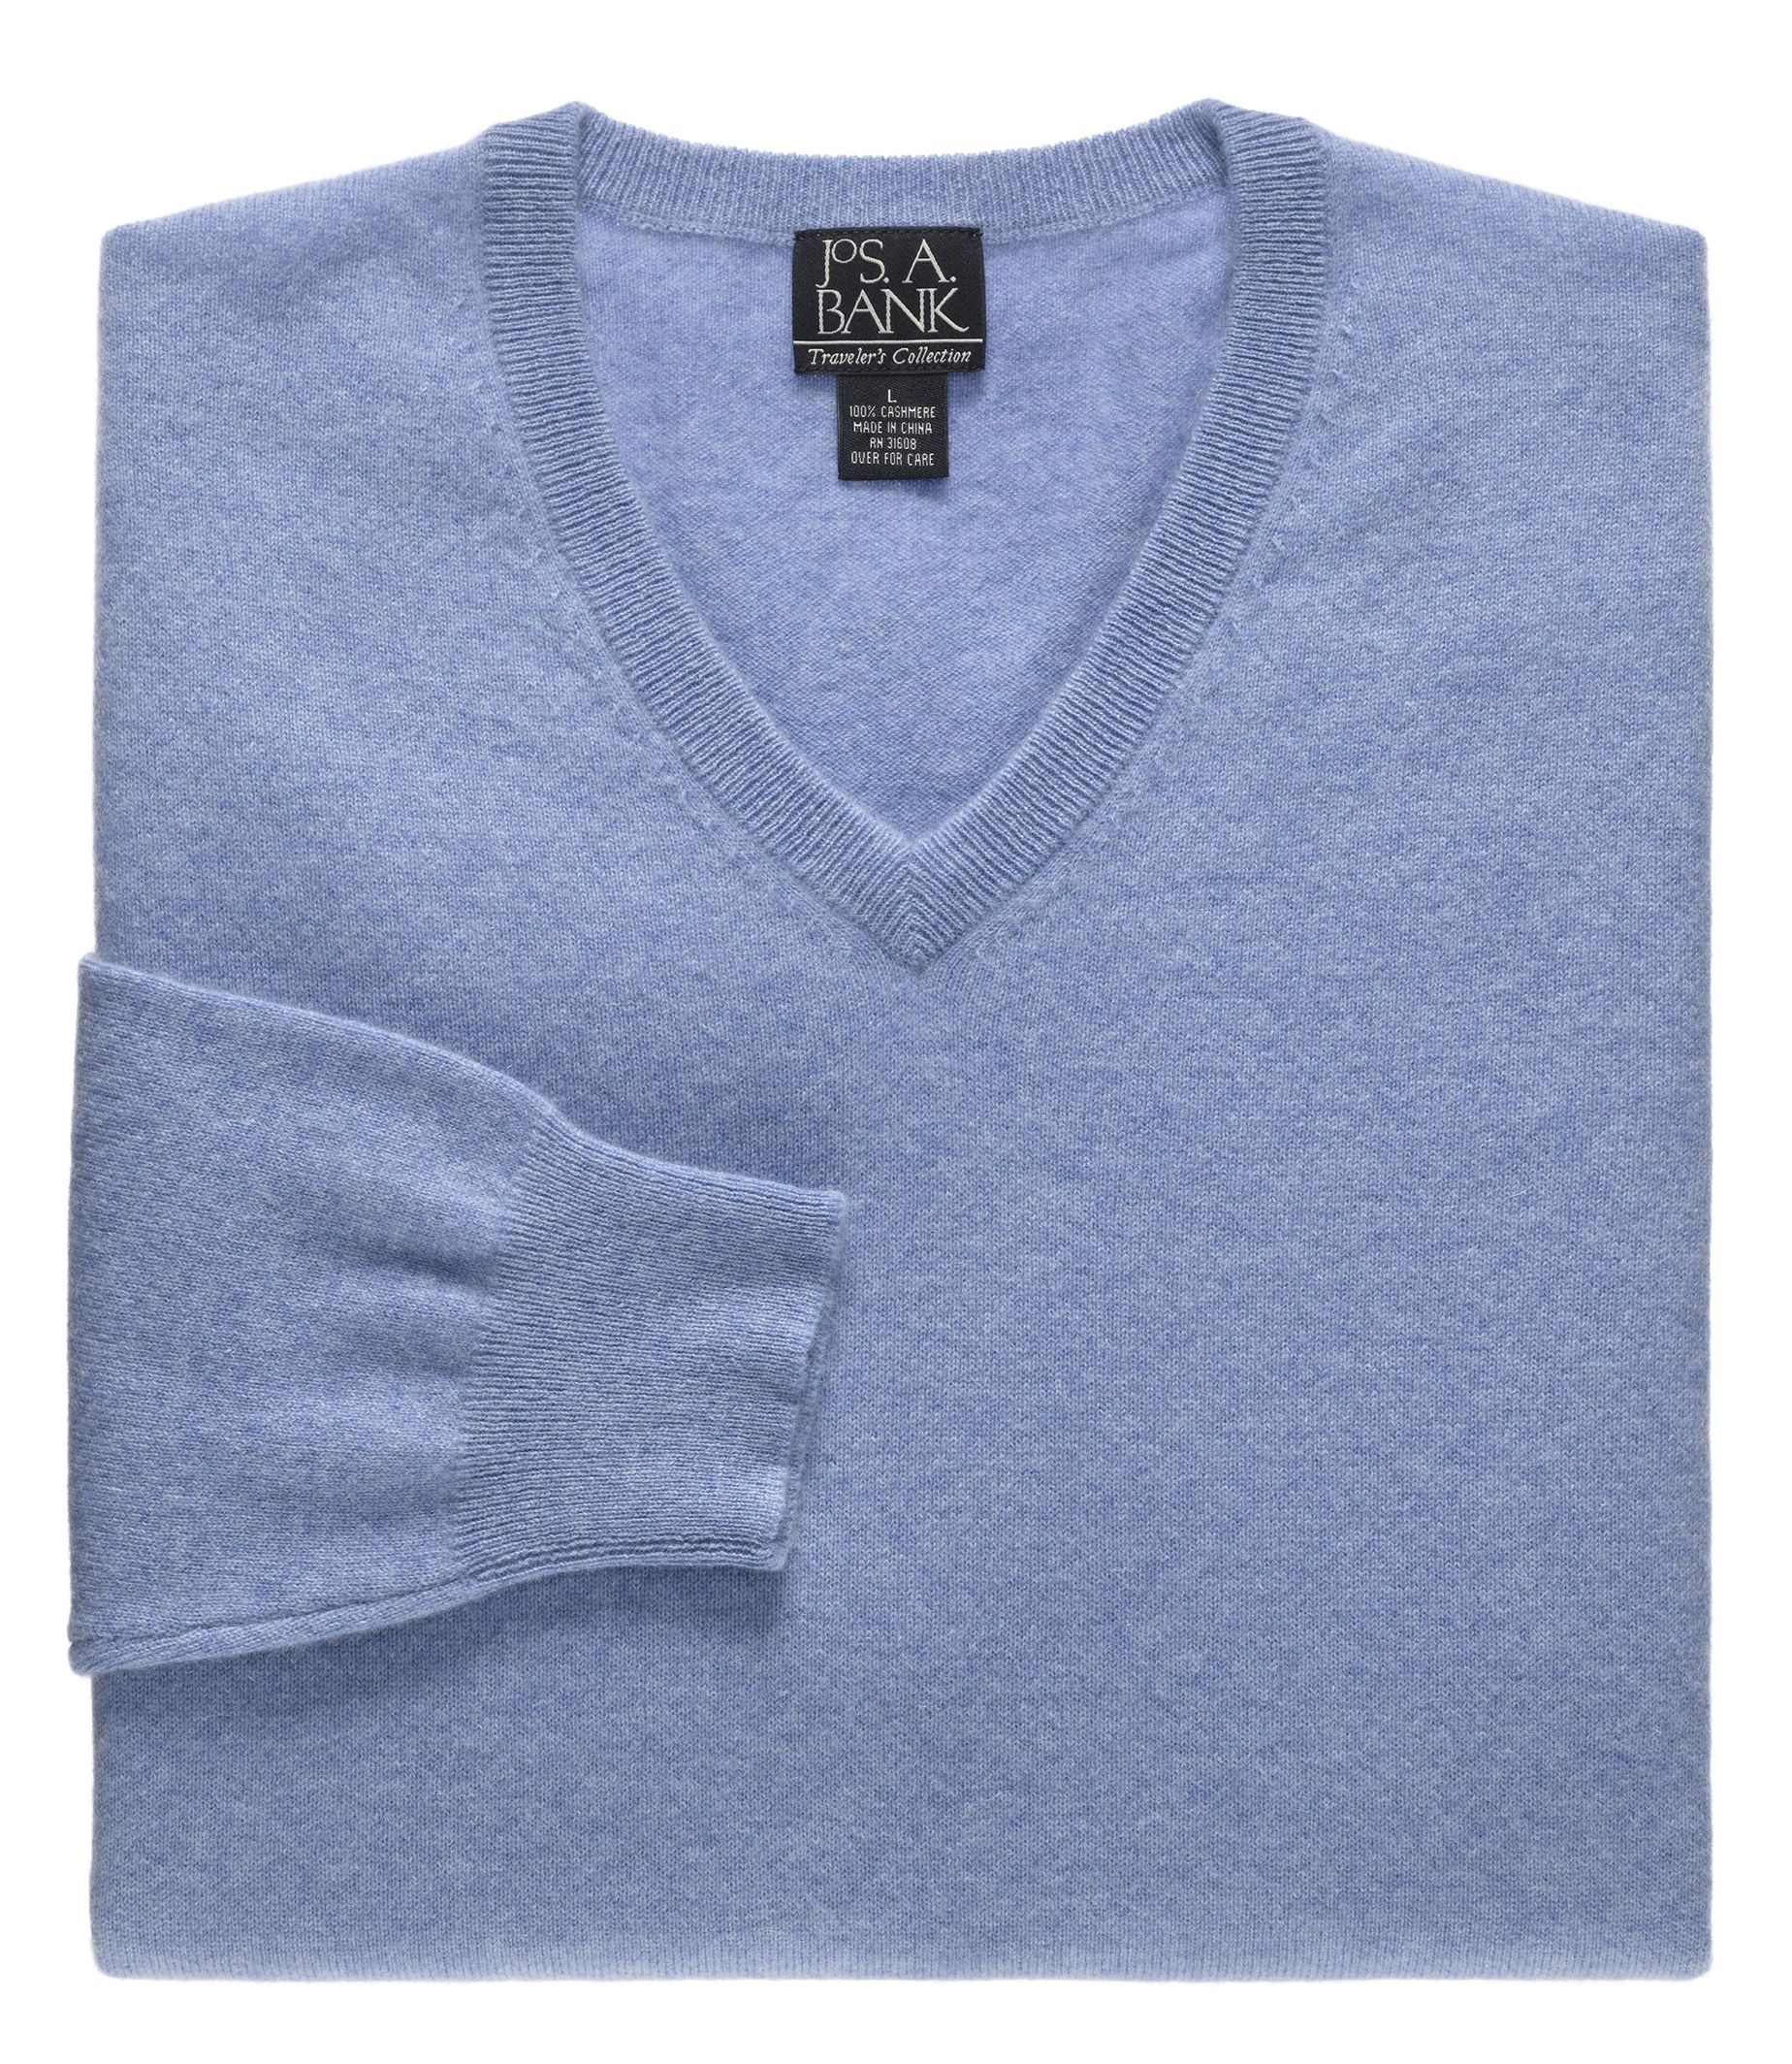 Cashmere sweater traveler collection cashmere v-neck sweater - traveler sweaters | jos a bank OFJOVTY